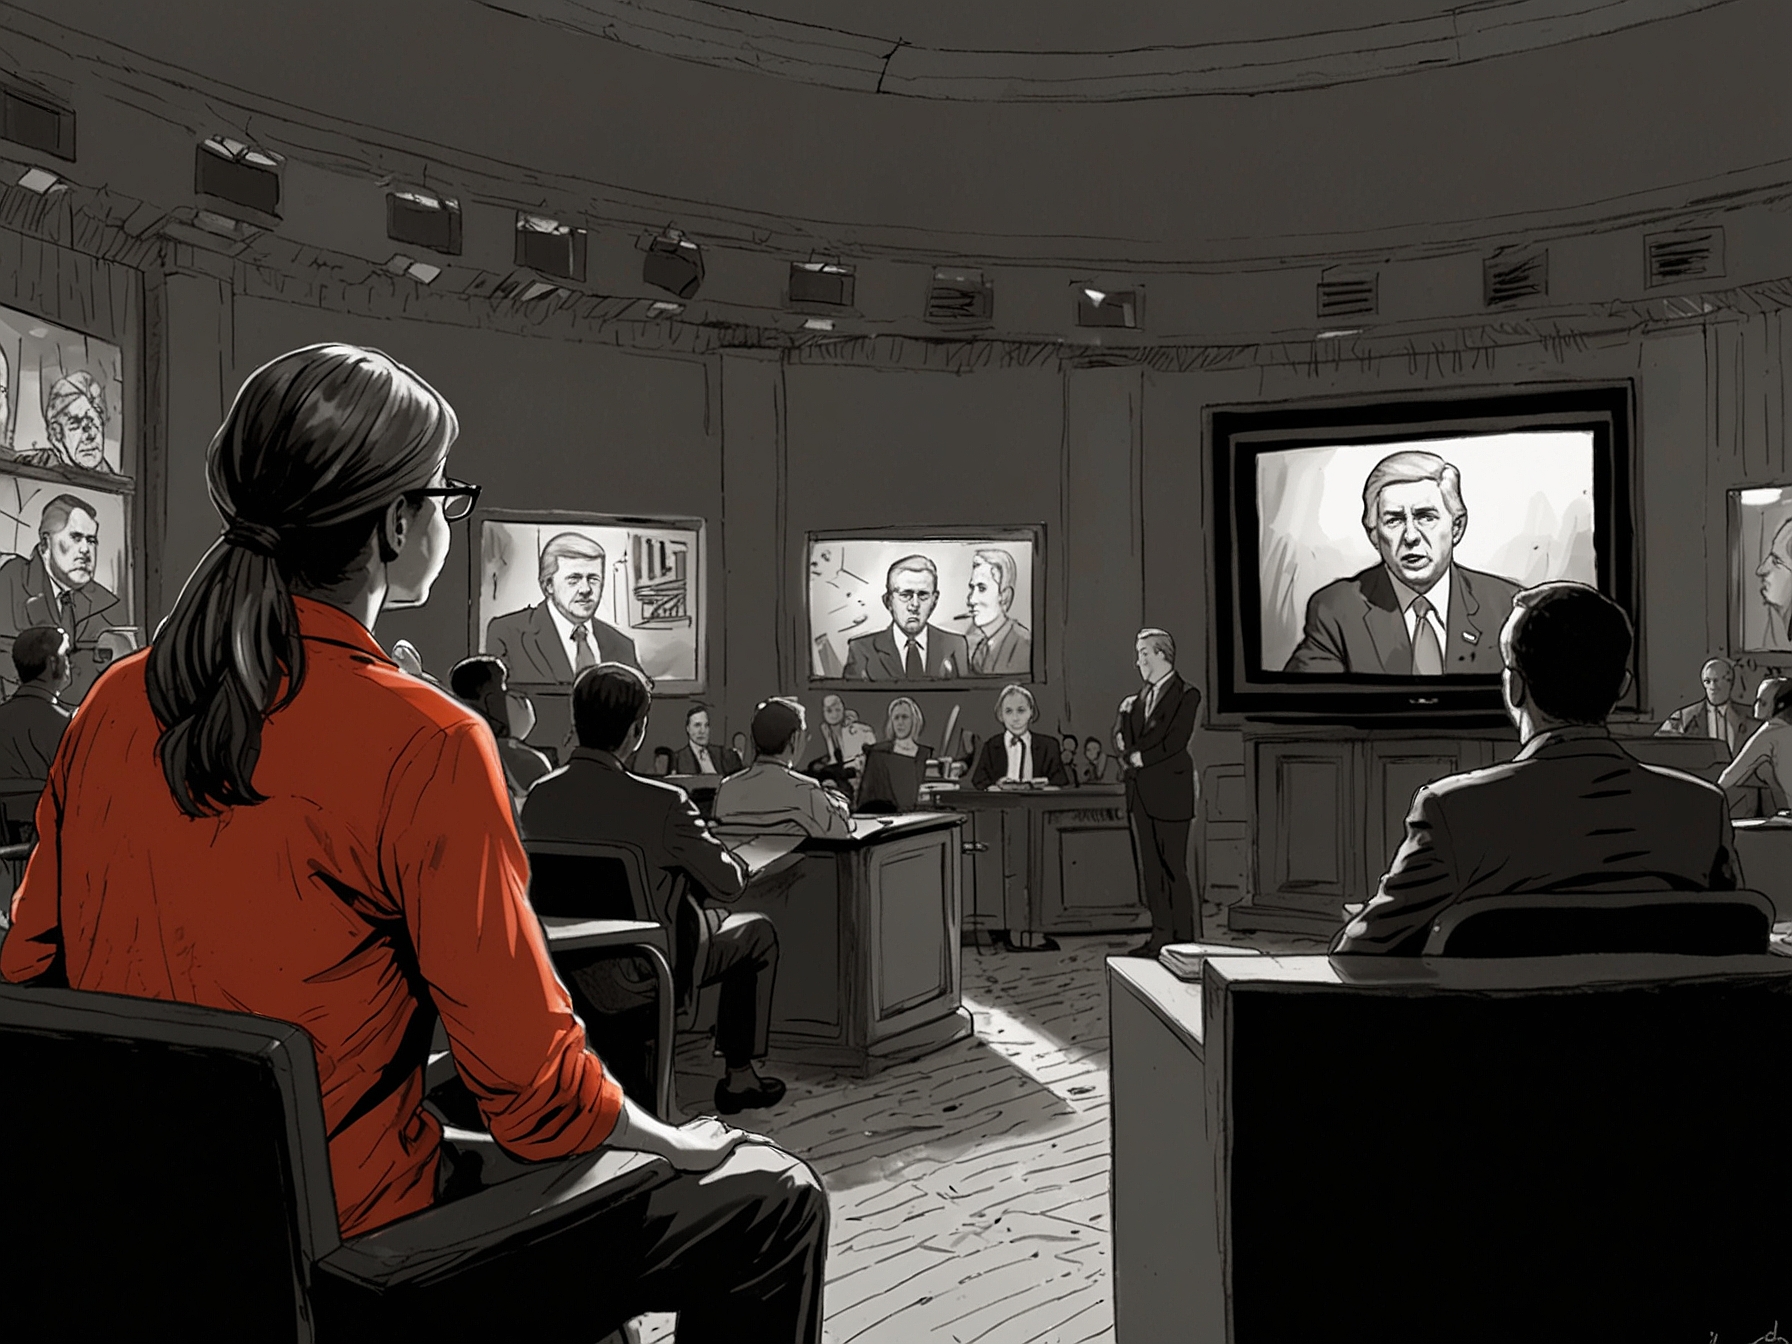 A viewer's perspective with a TV showing the chaotic presidential debate, capturing the disillusionment and frustration of the audience as they witness the lack of substantial discussion on pressing issues.